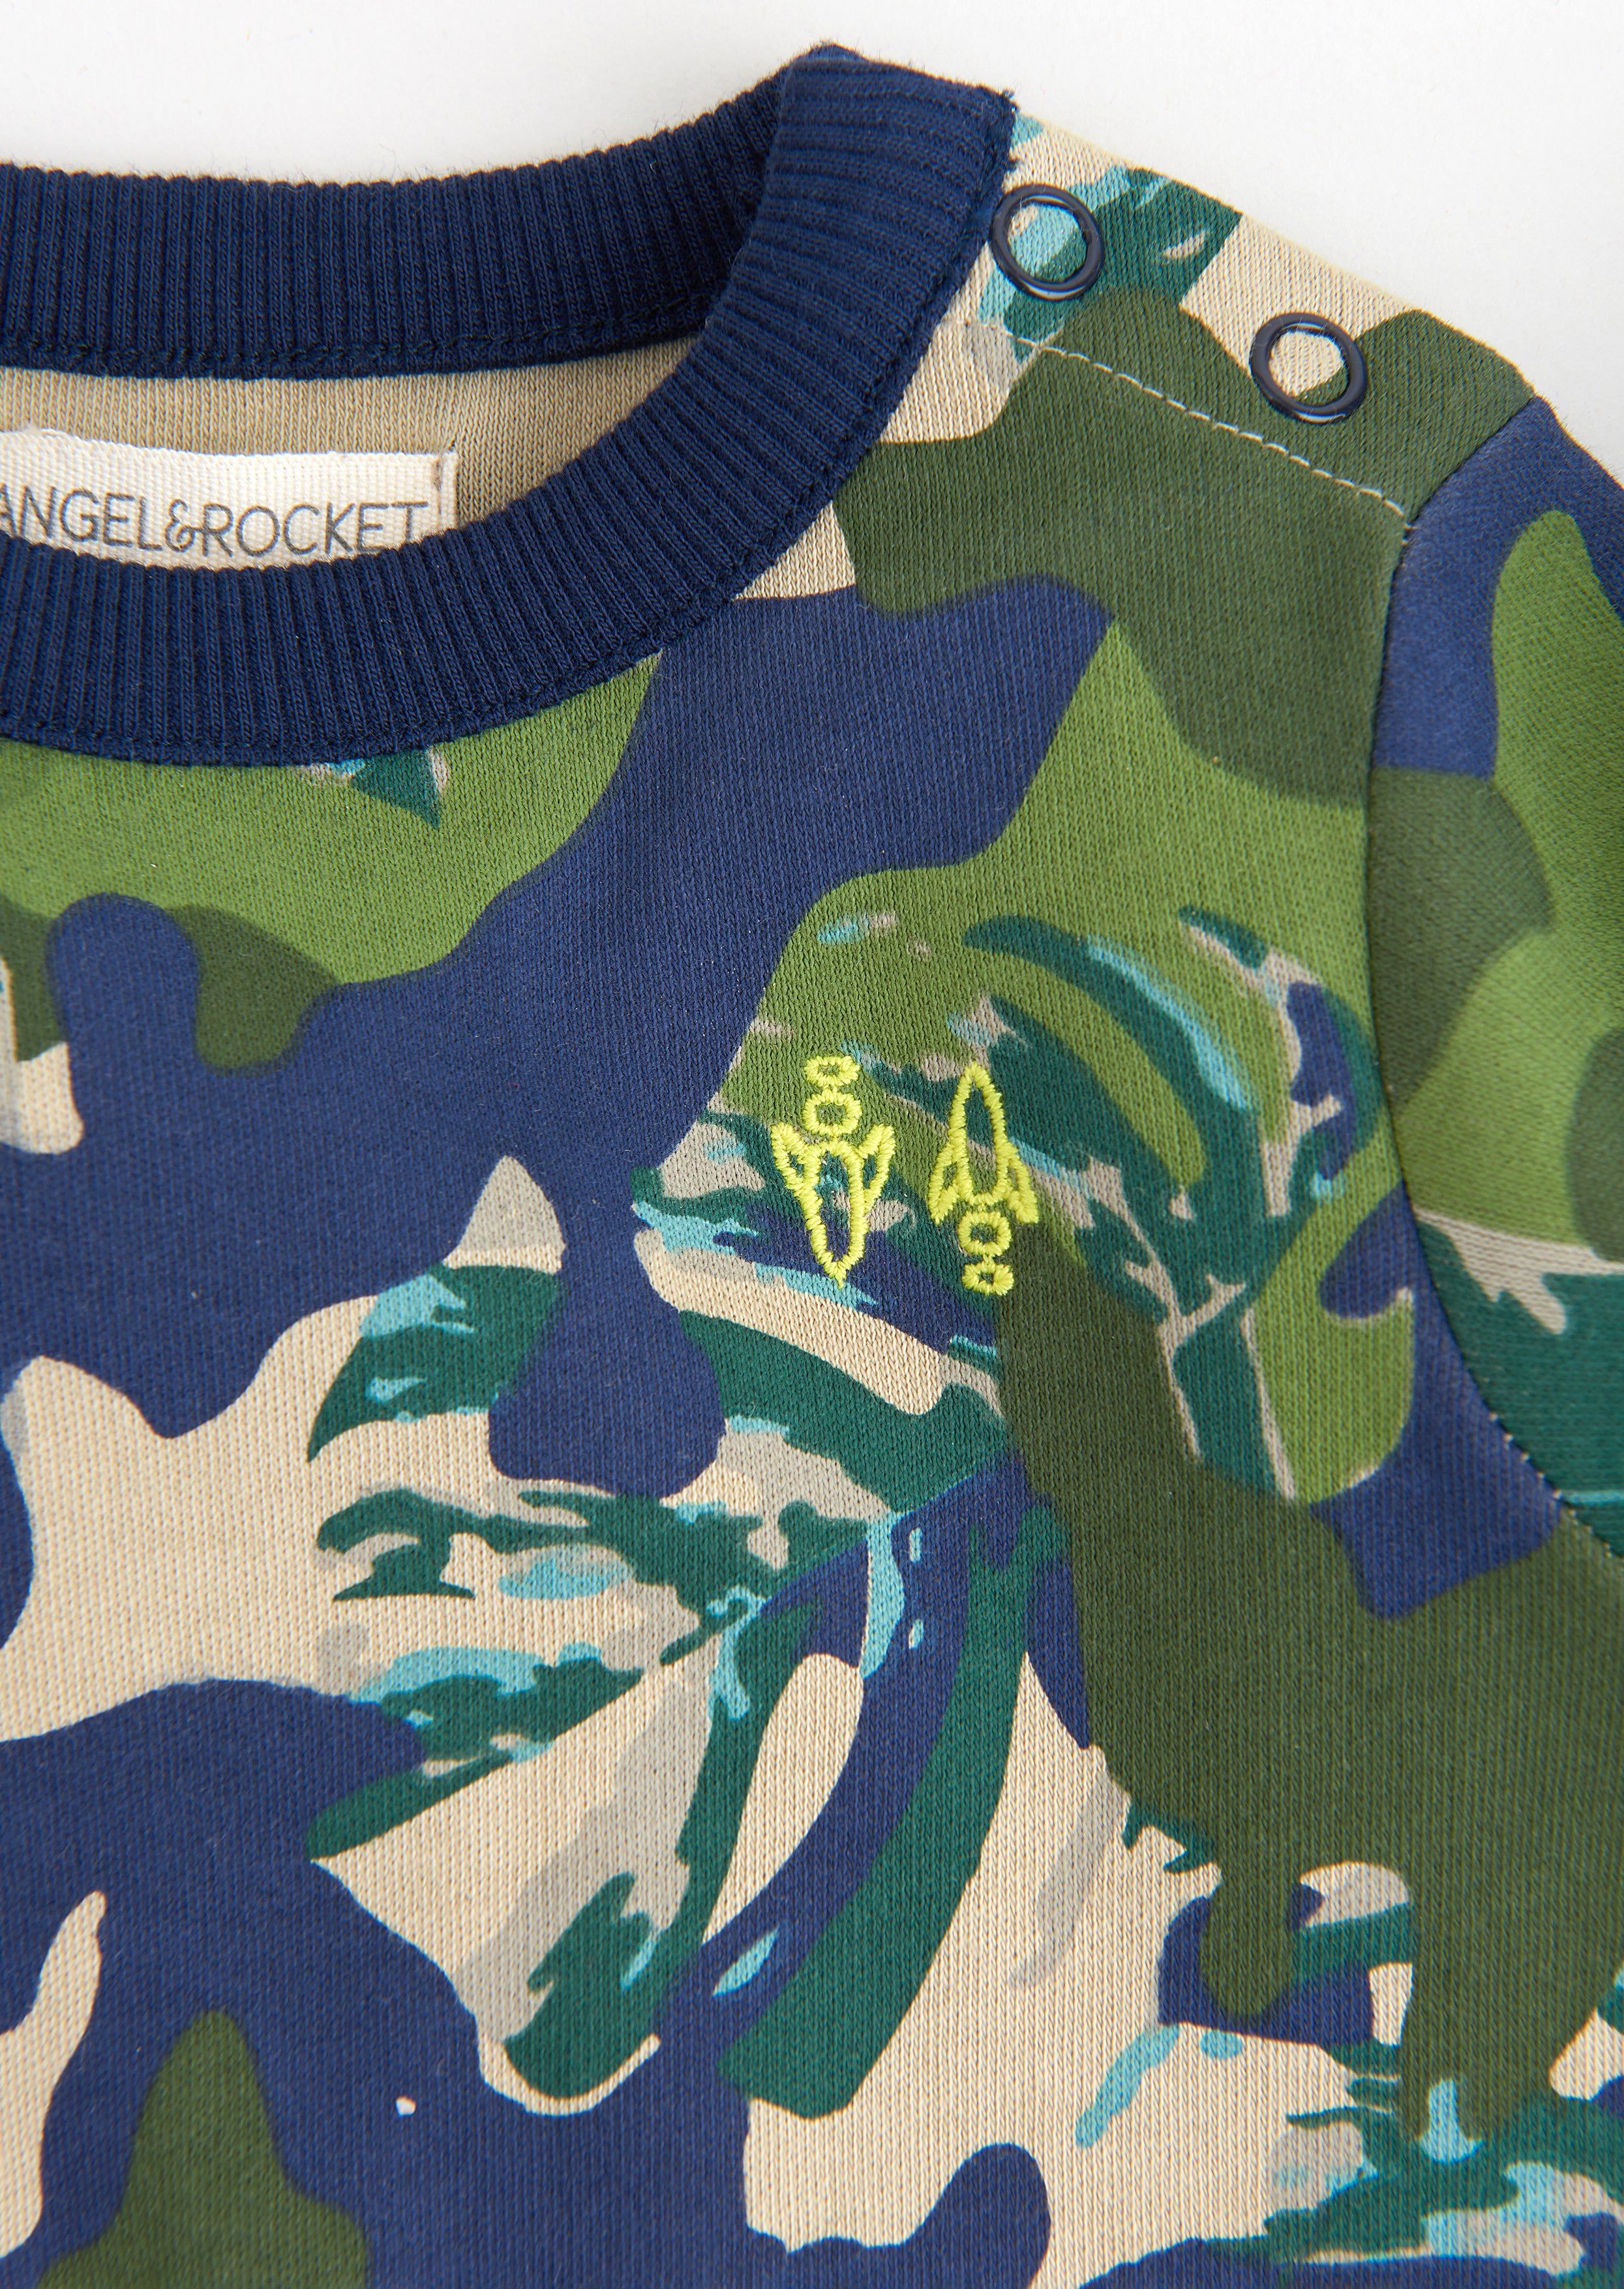 Here's one for your new recruit! All over printed tropical camo design with contrast navy trim. Made in super soft cotton jersey with popper leg opening for easy fuss free dressing and logo print on the feet.  Angel & Rocket cares – made with fairtrade cotton  Colour : Khaki print  About me: 100% cotton  Look after me – Think planet  wash at 30c